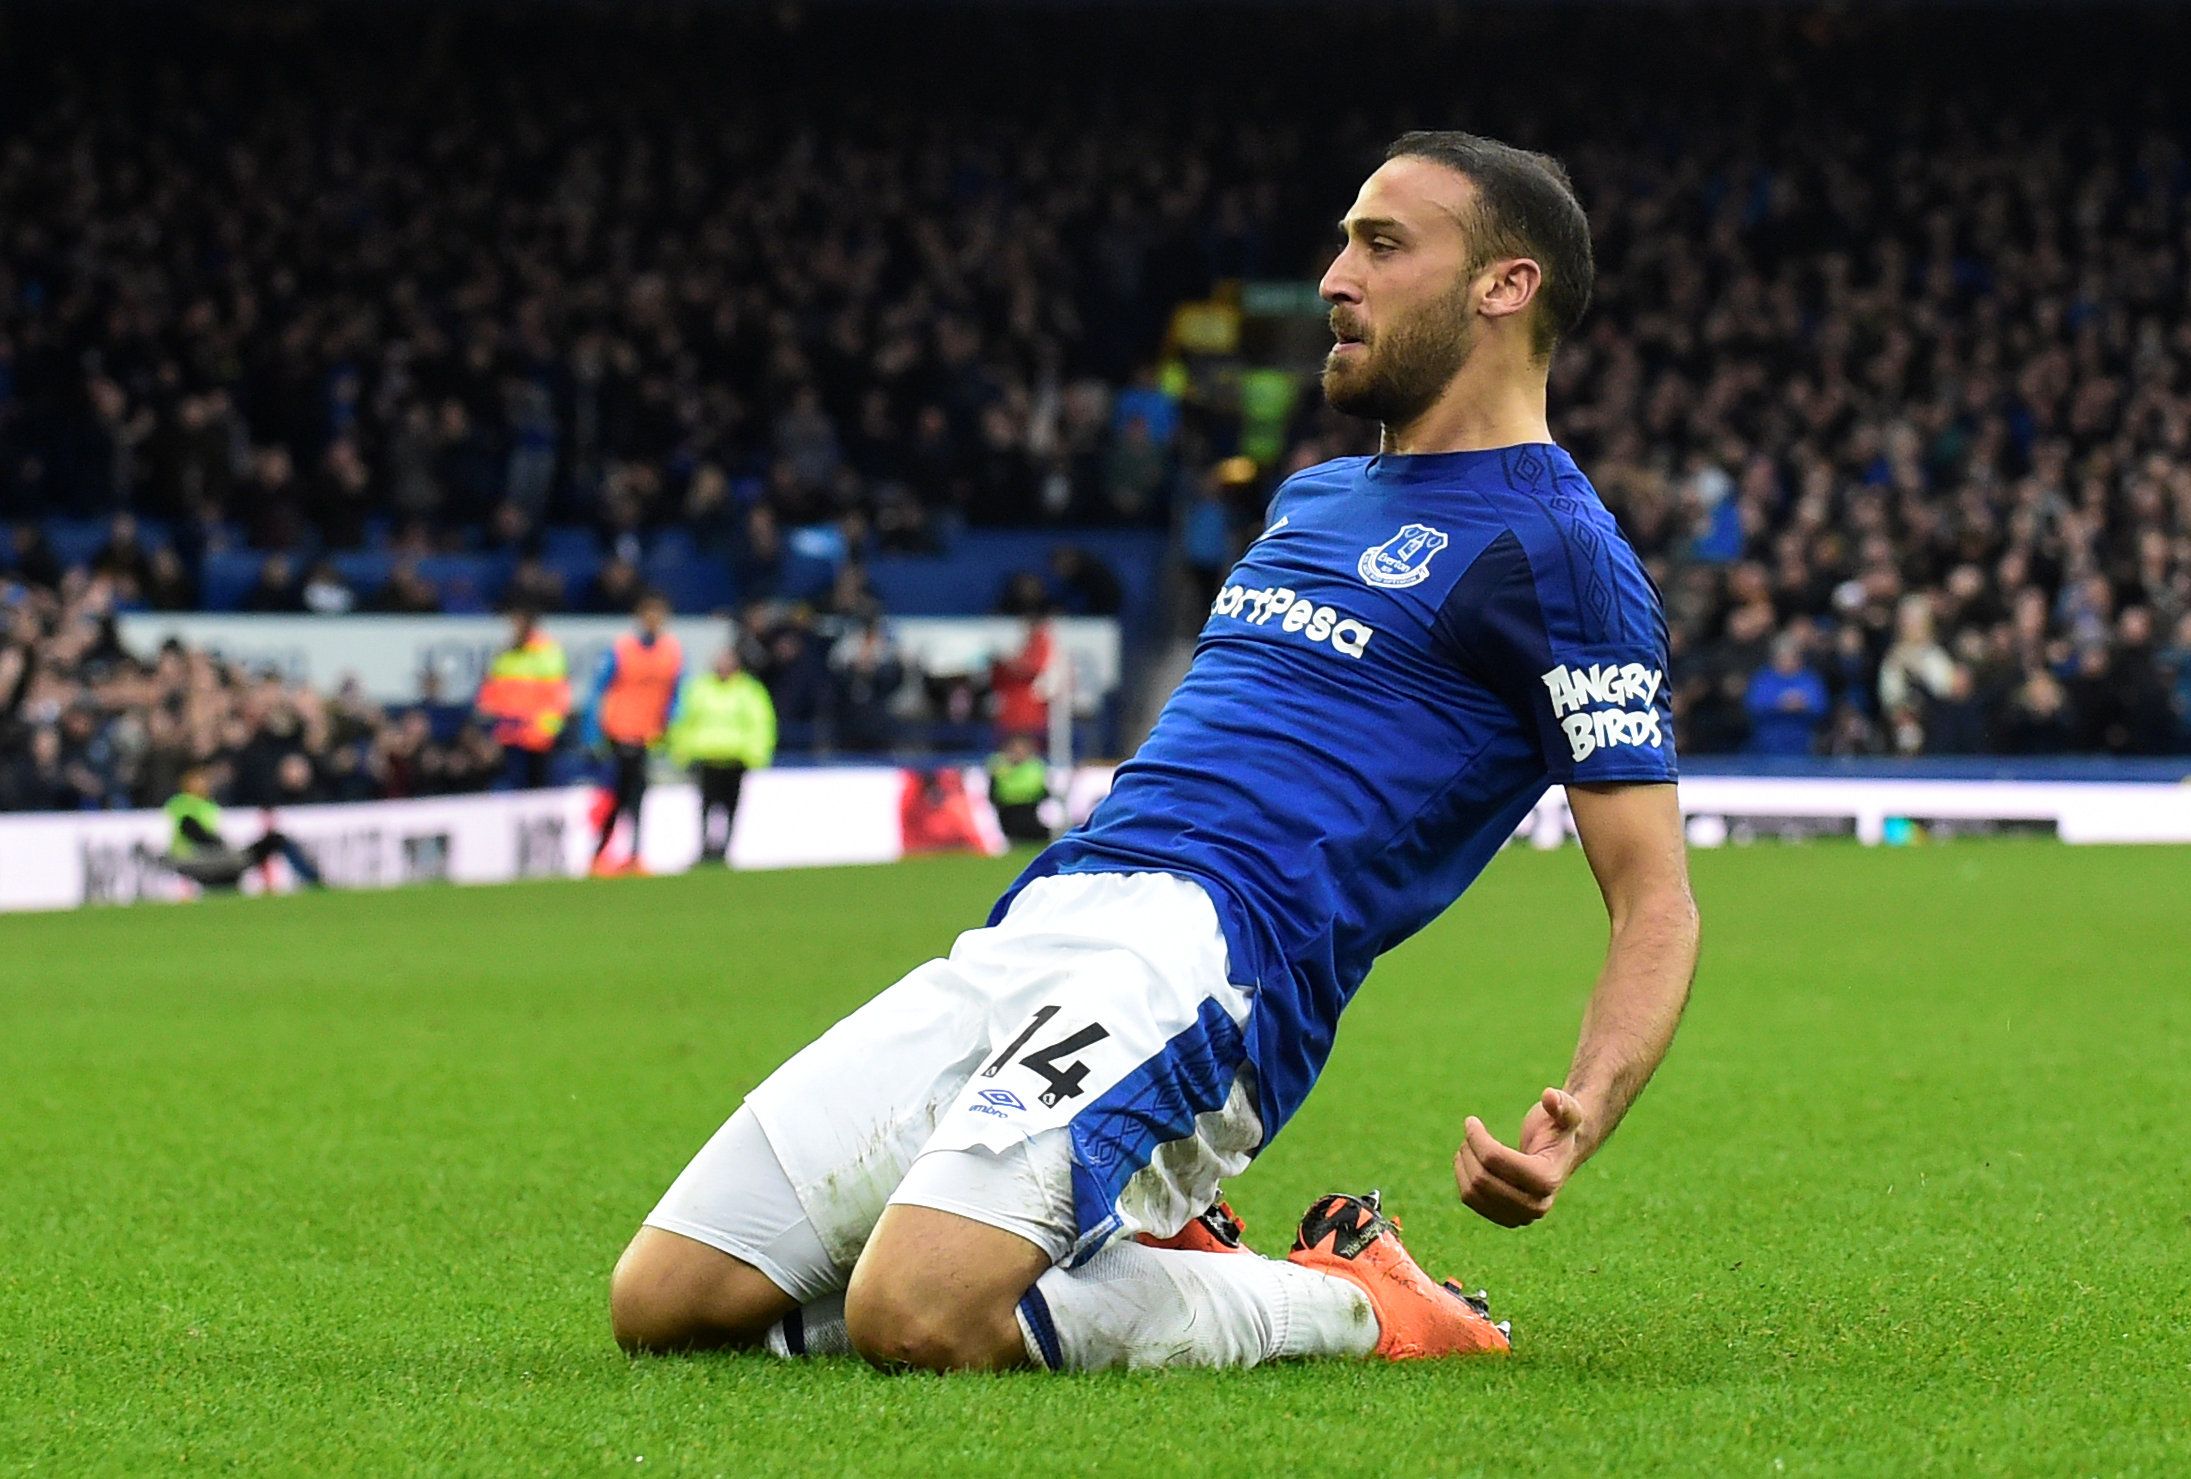 Soccer Football - Premier League - Everton vs Brighton &amp; Hove Albion - Goodison Park, Liverpool, Britain - March 10, 2018   Everton's Cenk Tosun celebrates scoring their second goal               REUTERS/Rebecca Naden    EDITORIAL USE ONLY. No use with unauthorized audio, video, data, fixture lists, club/league logos or 